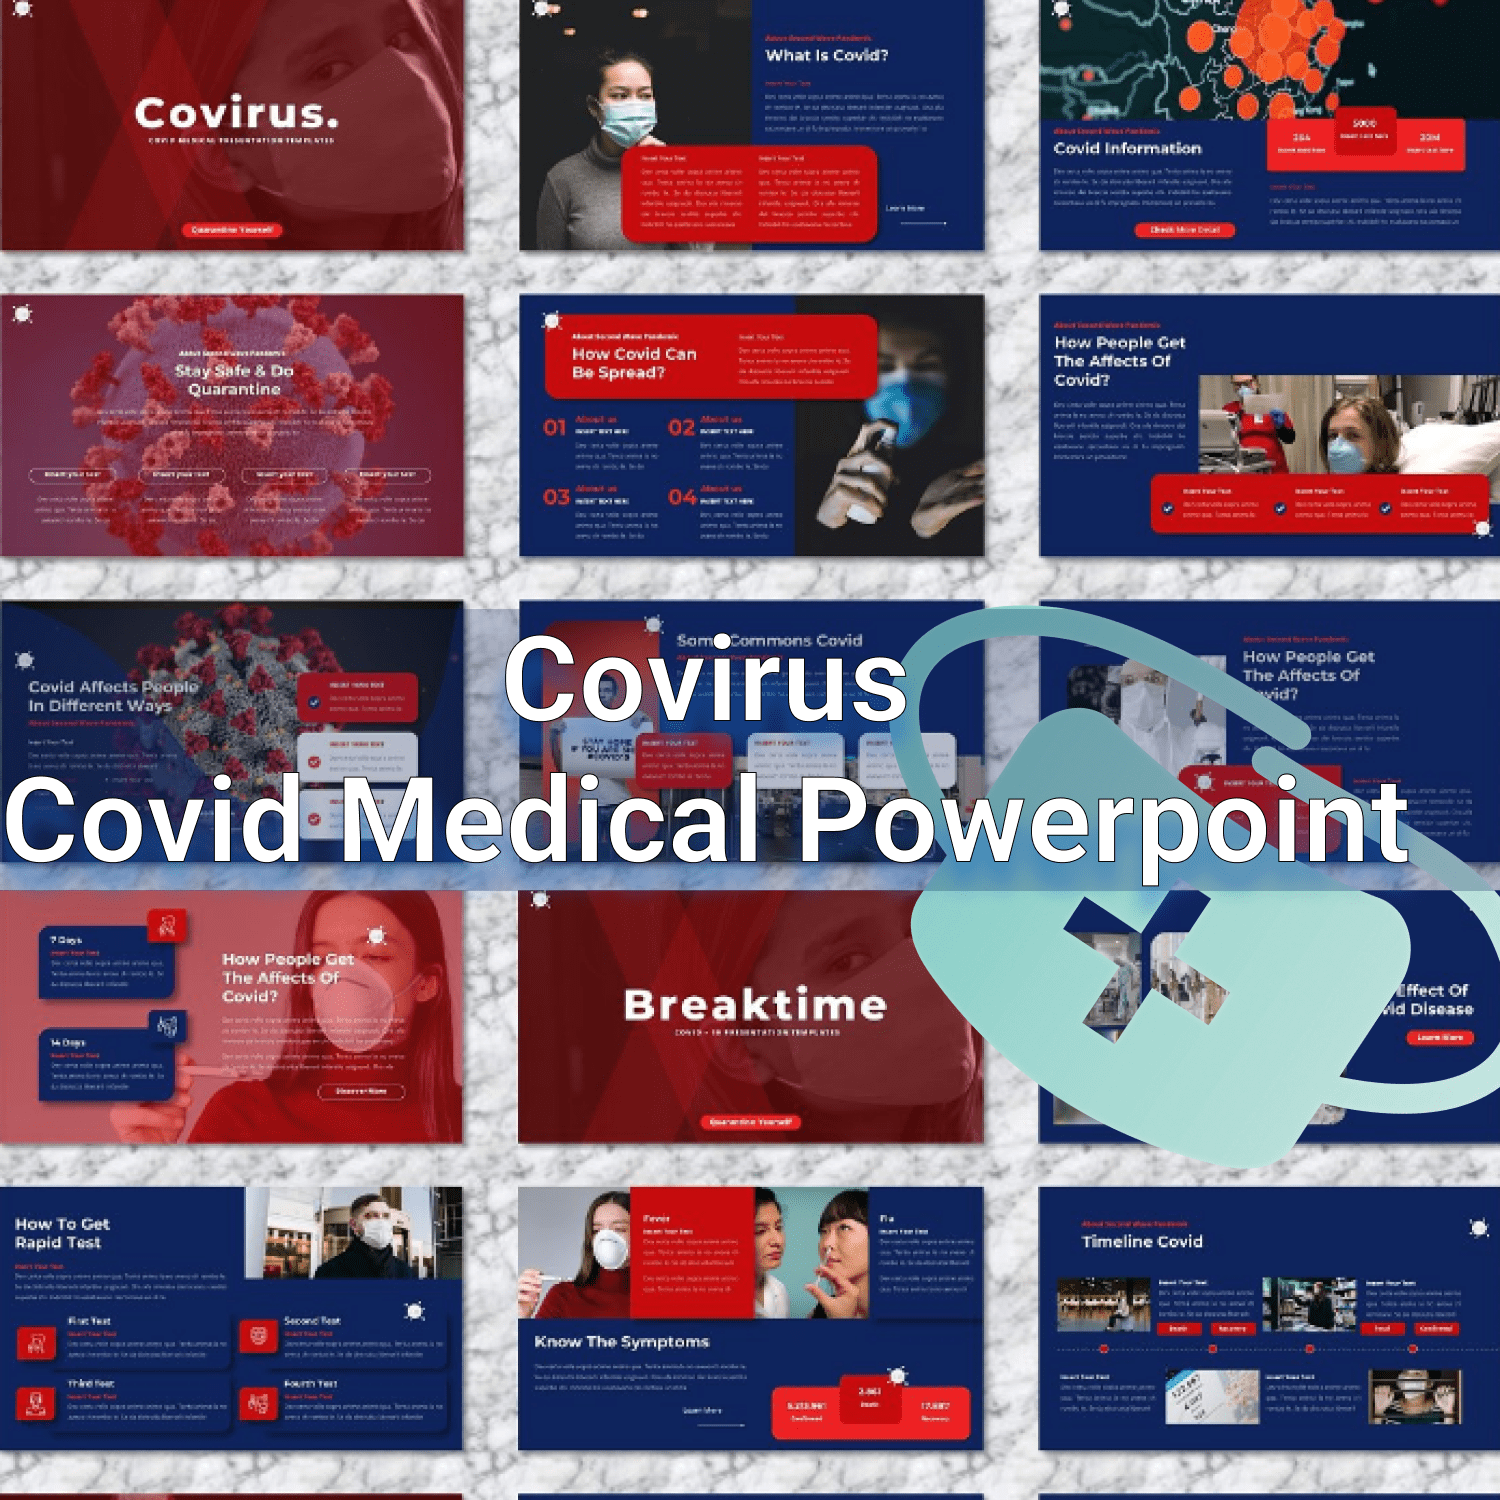 Covirus - Covid Medical Powerpoint cover image.